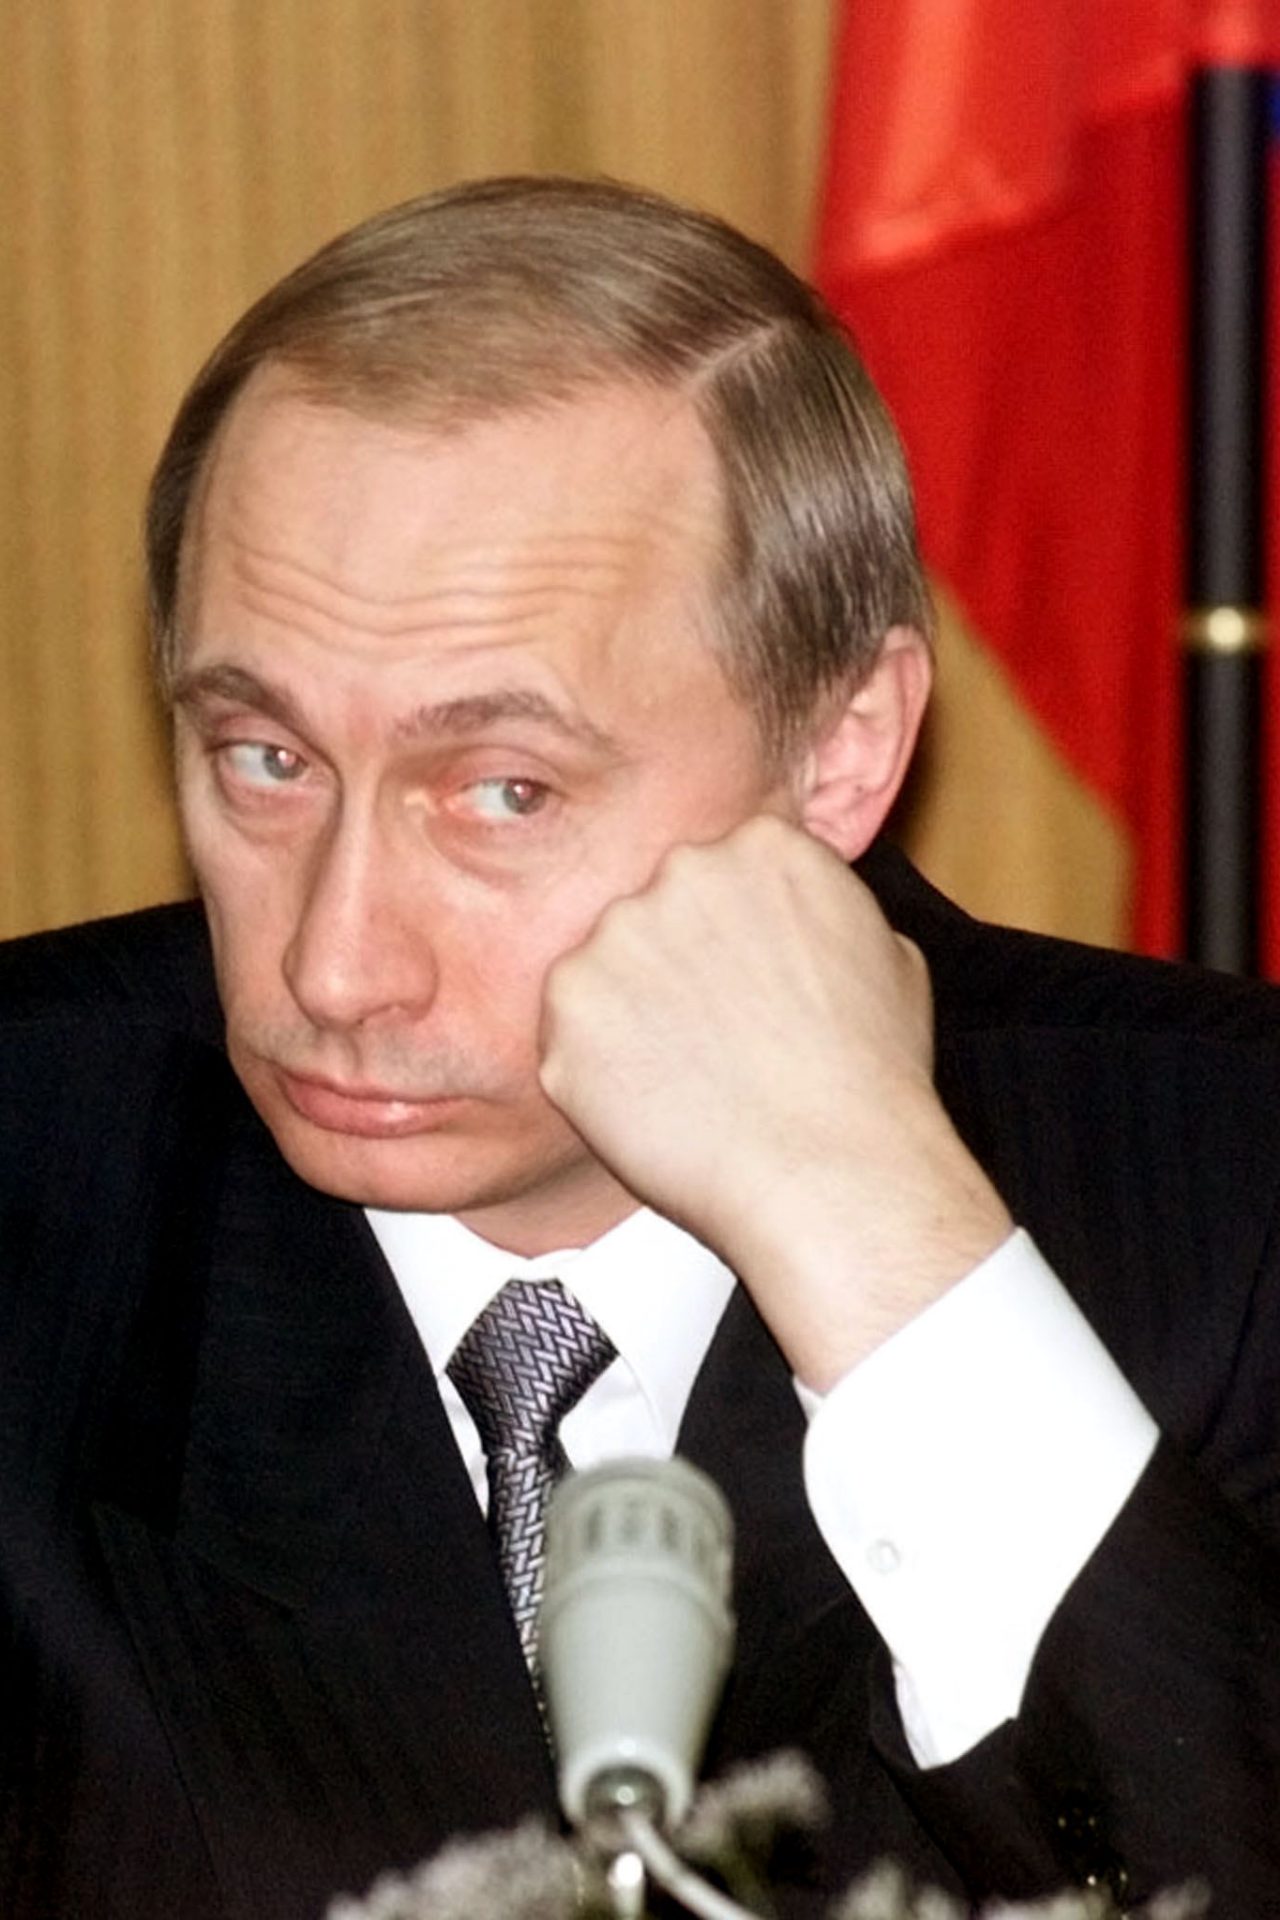 Leader of Russia since 2000